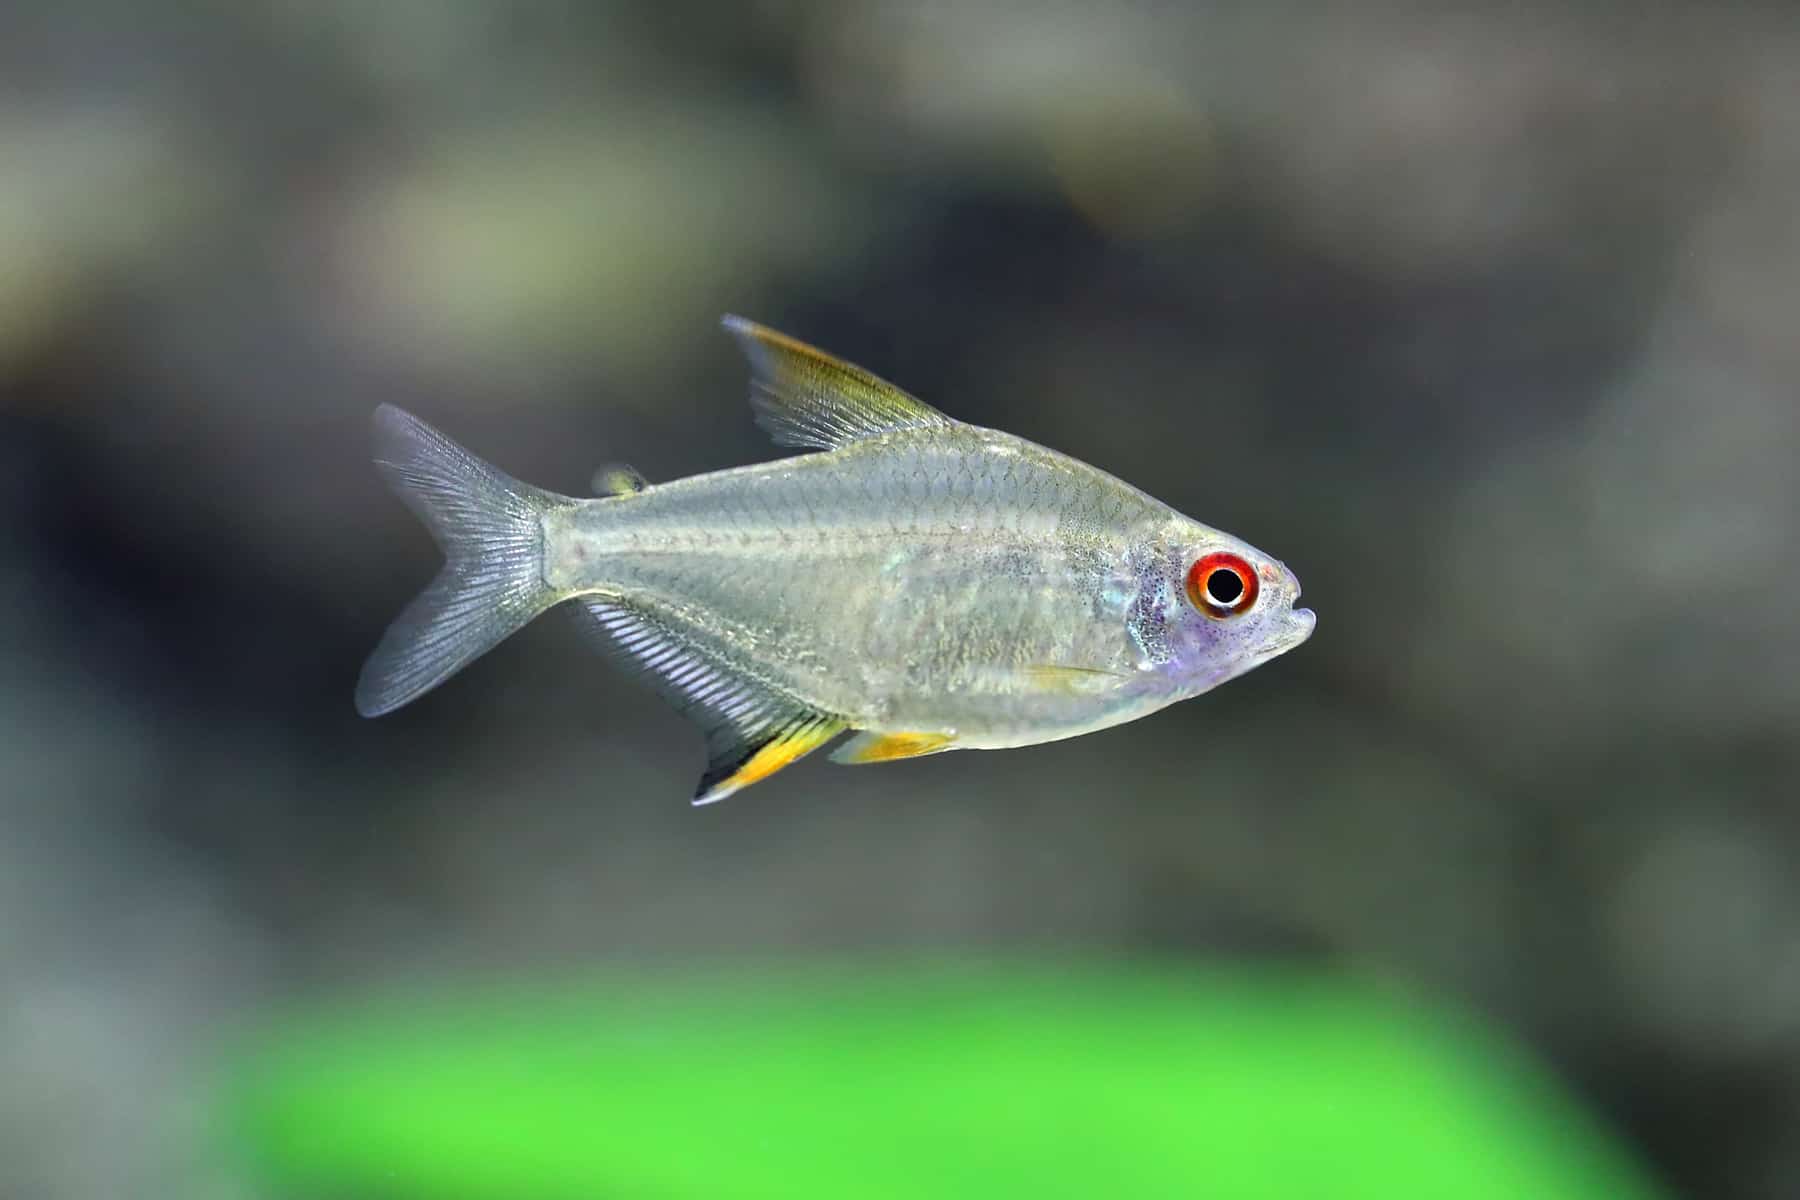 How To Care For The Brightly Colored Lemon Tetra